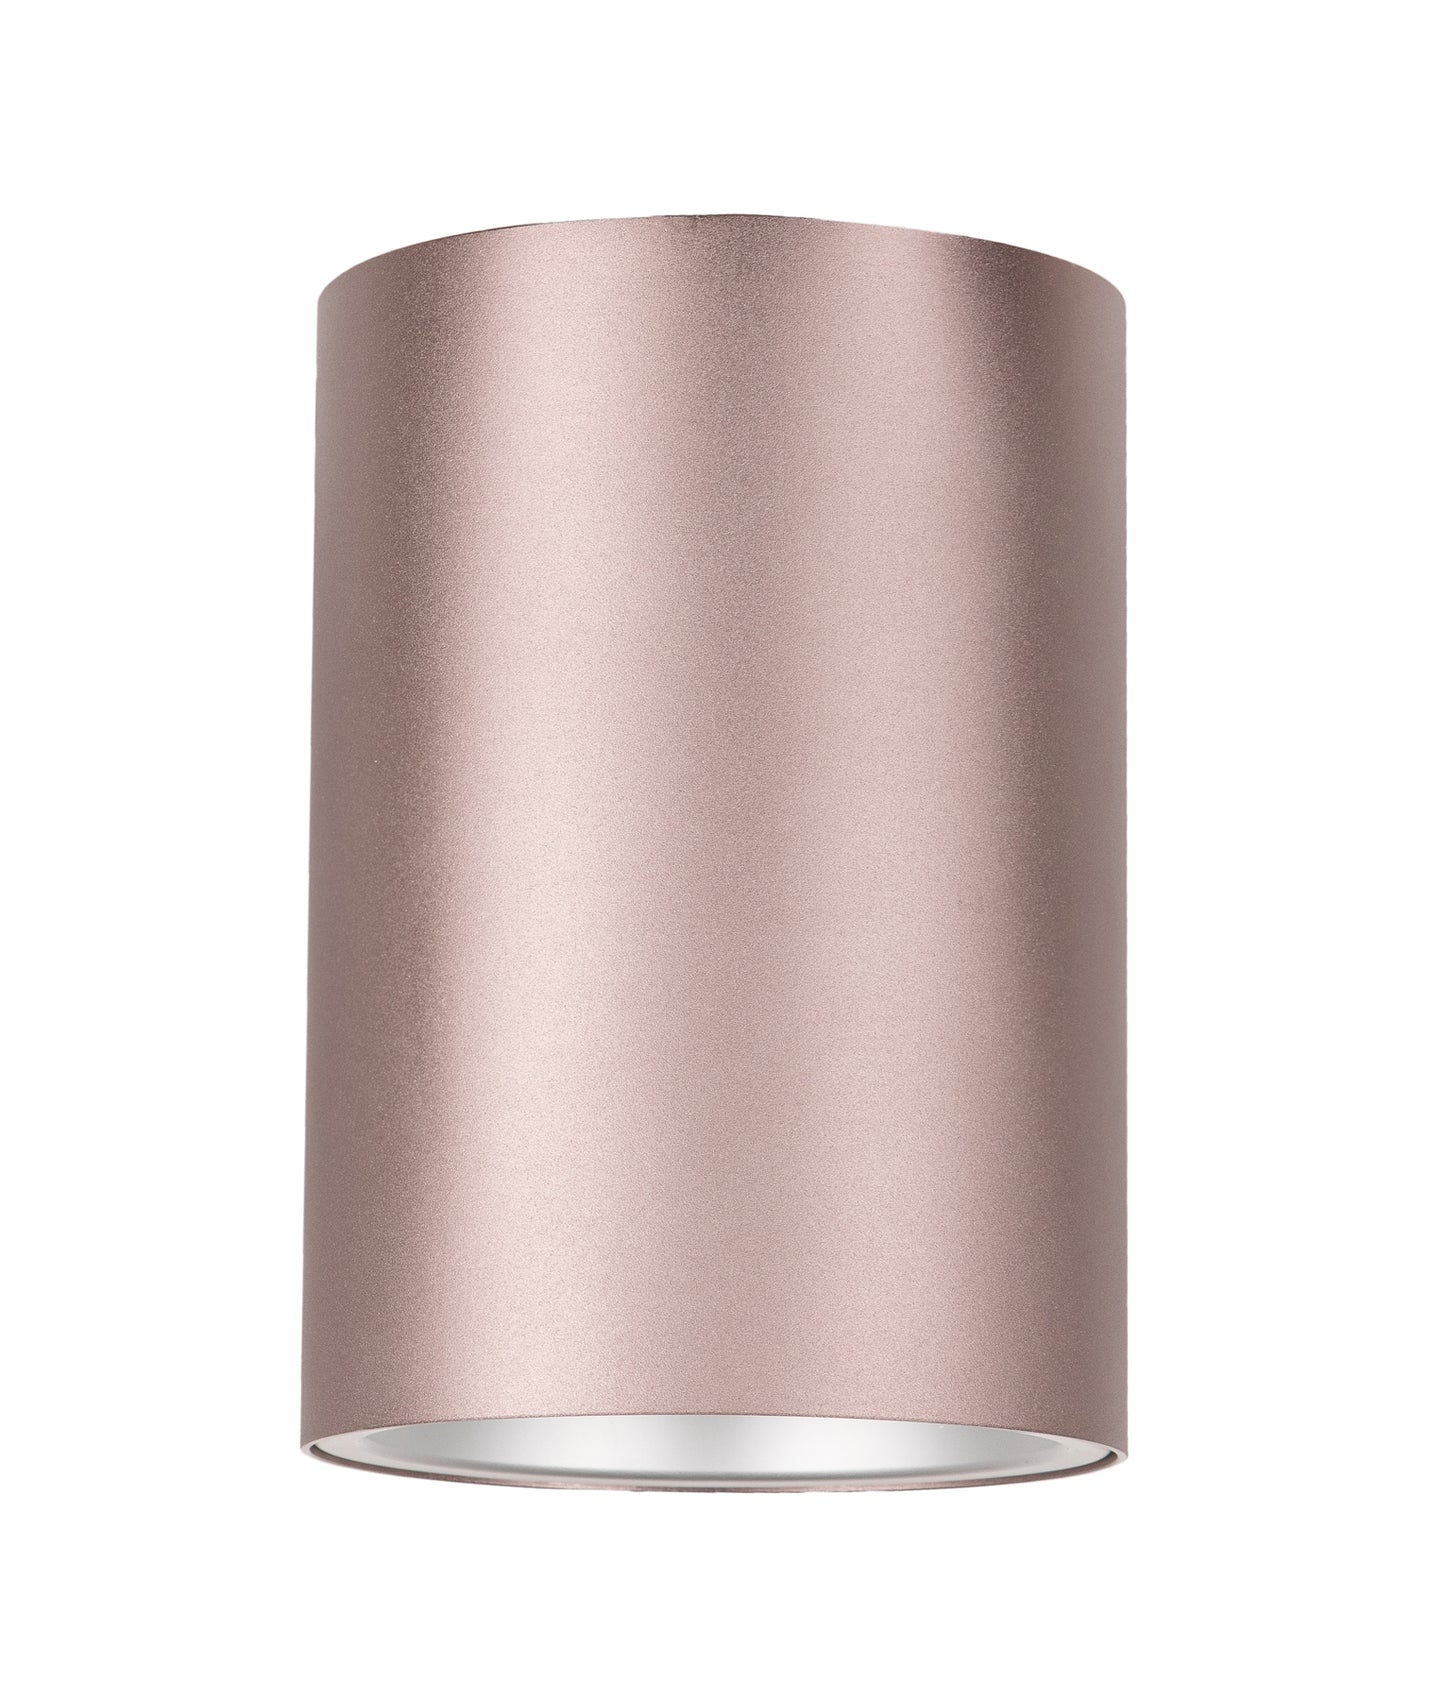 SURFACE: GU10 Surface Mounted Ceiling Downlights